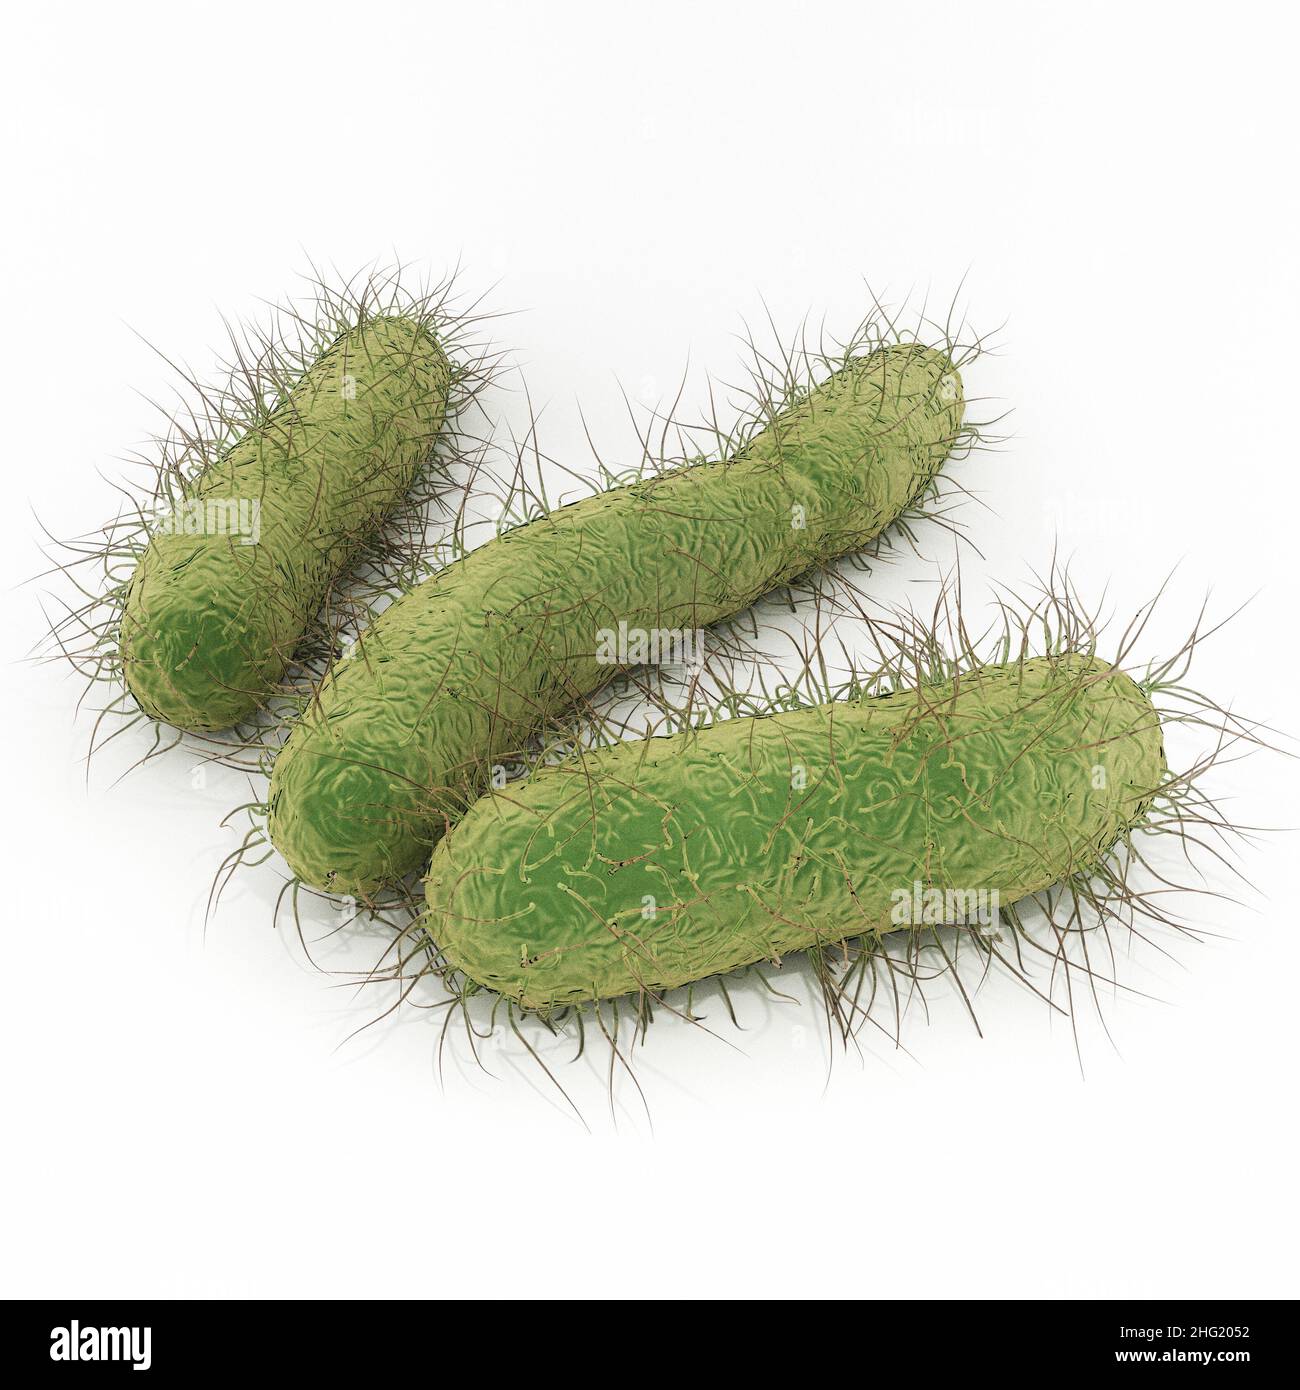 E. Coli Bacteria - An illustration of Escherichia coli  is a  rod-shaped bacterium of the genus Escherichia that can cause serious food poisoning. Stock Photo